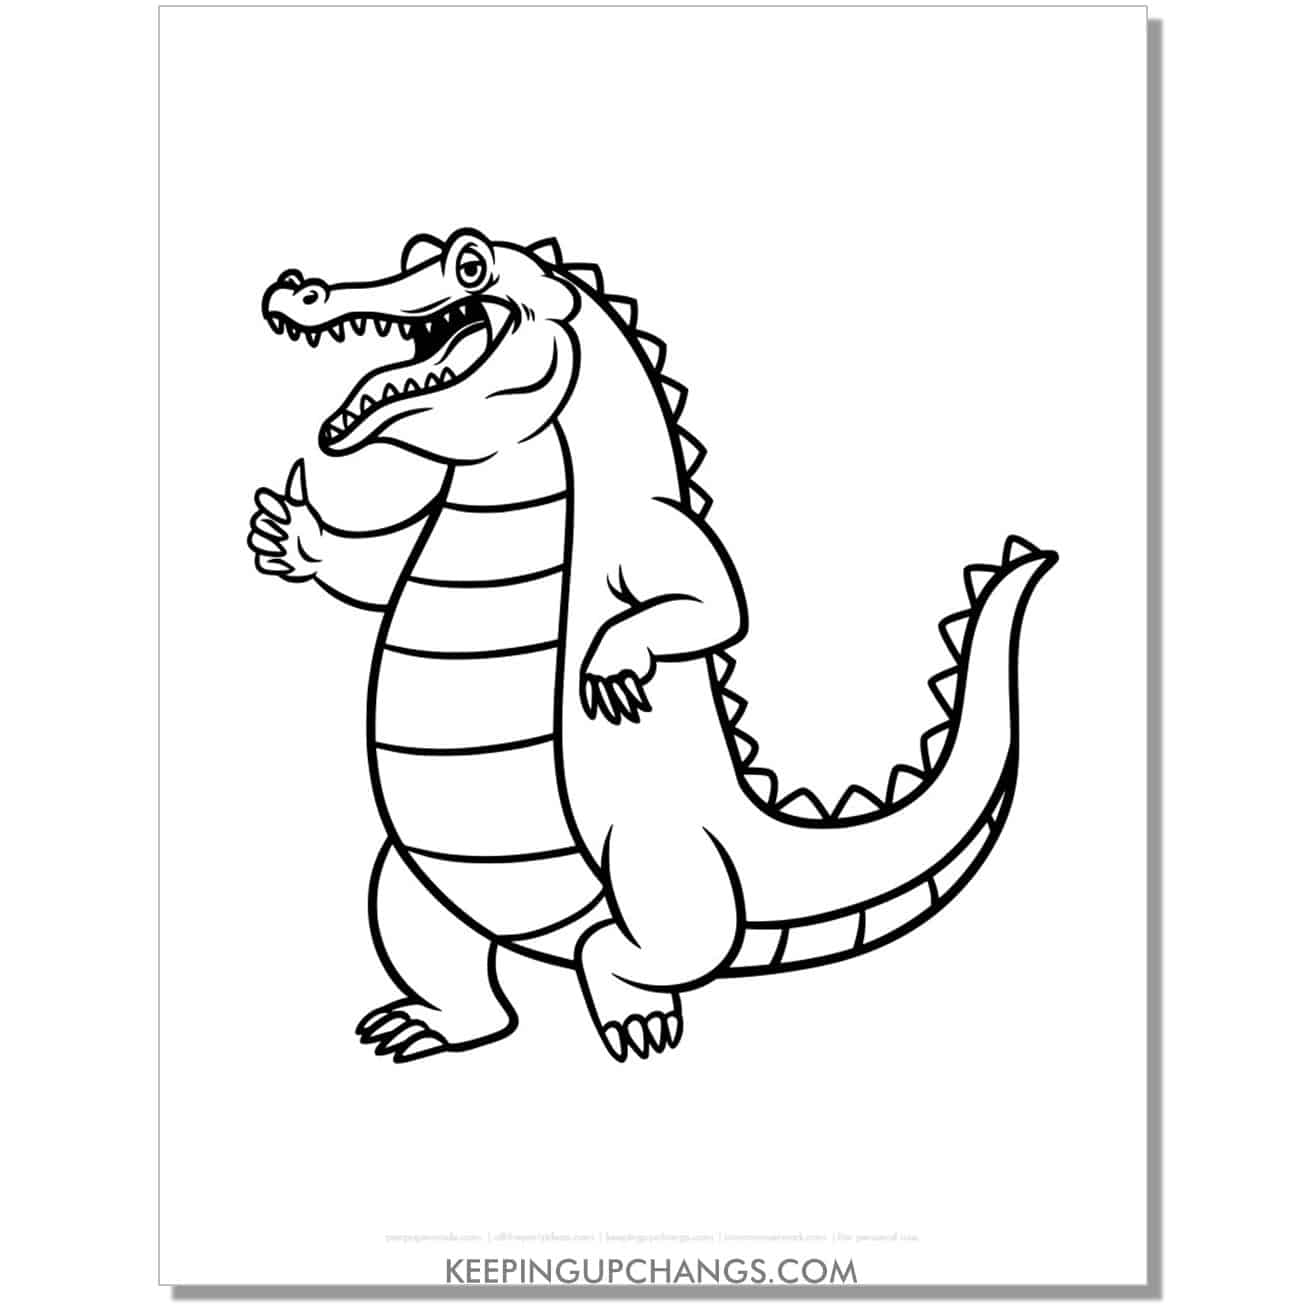 free alligator, crocodile with thumbs up coloring page, sheet.